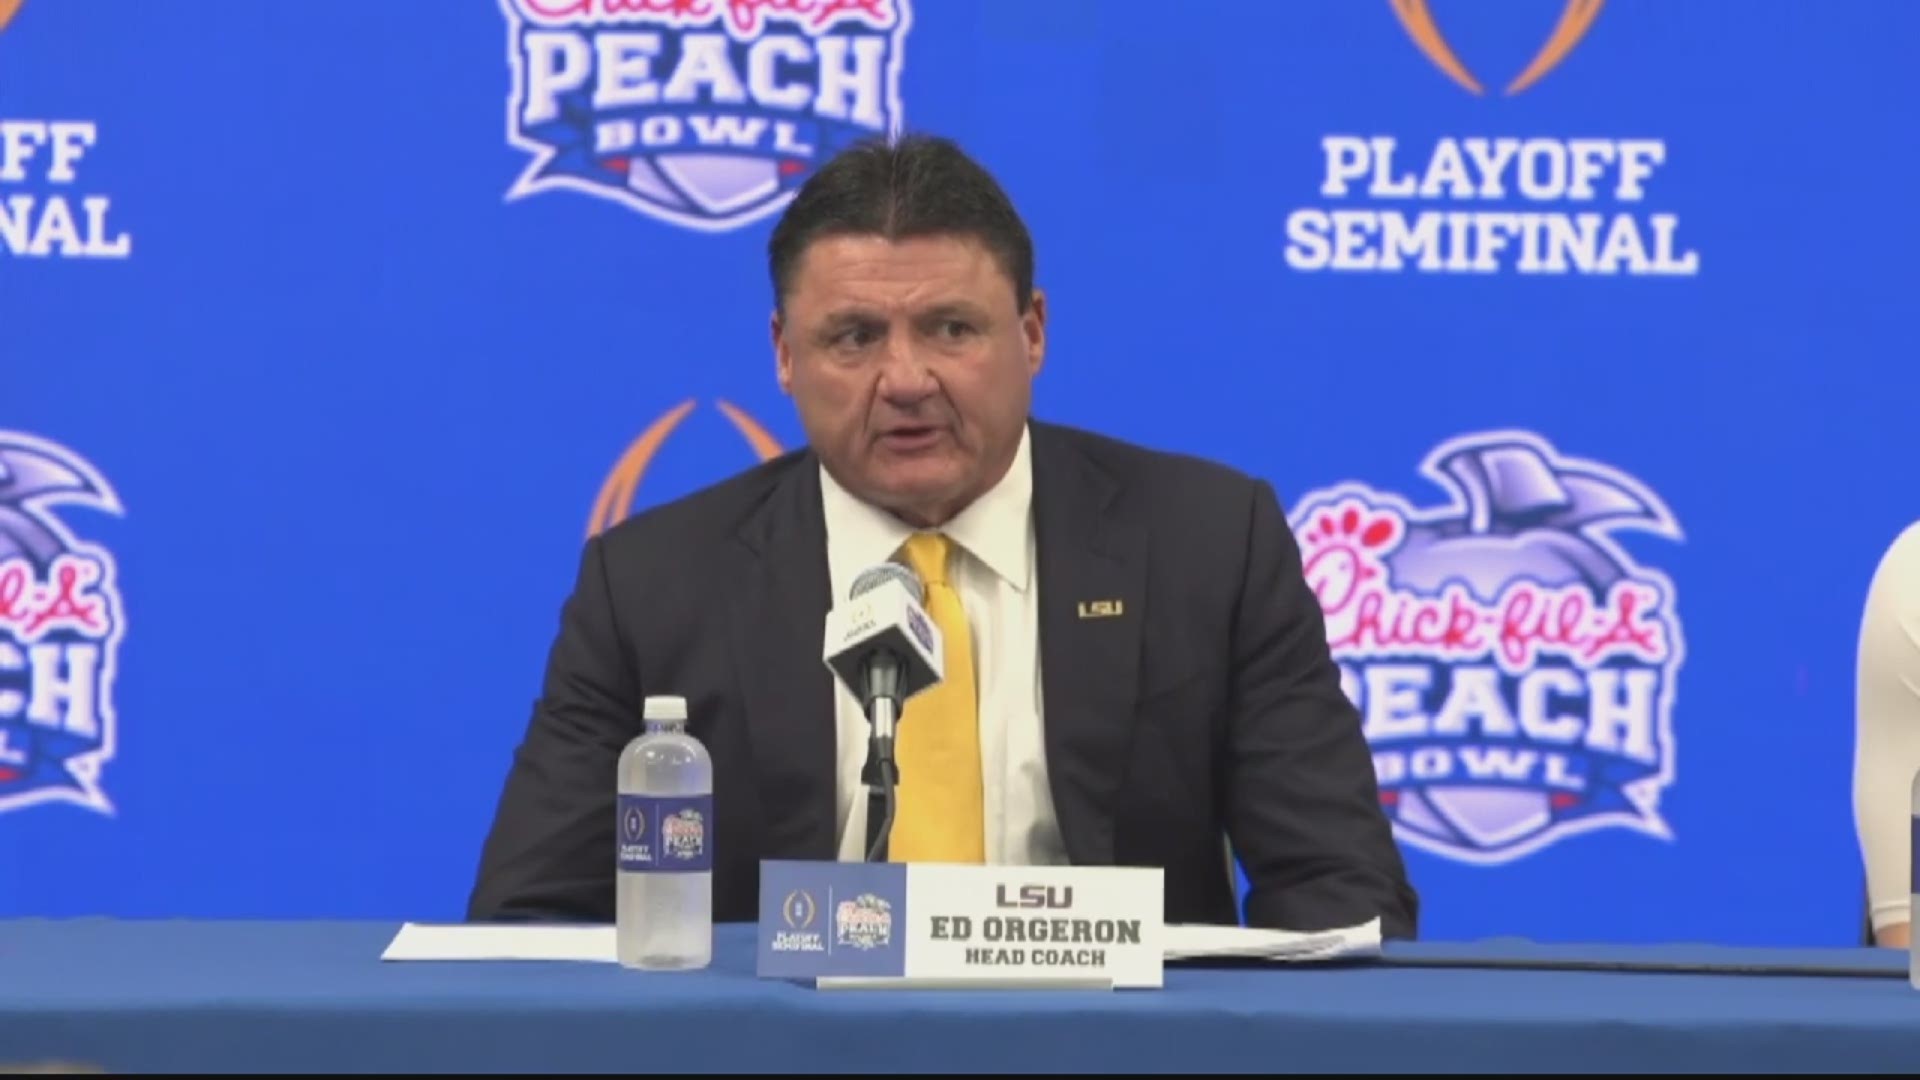 President Trump called Coach O after LSU's Peach Bowl win: report |  